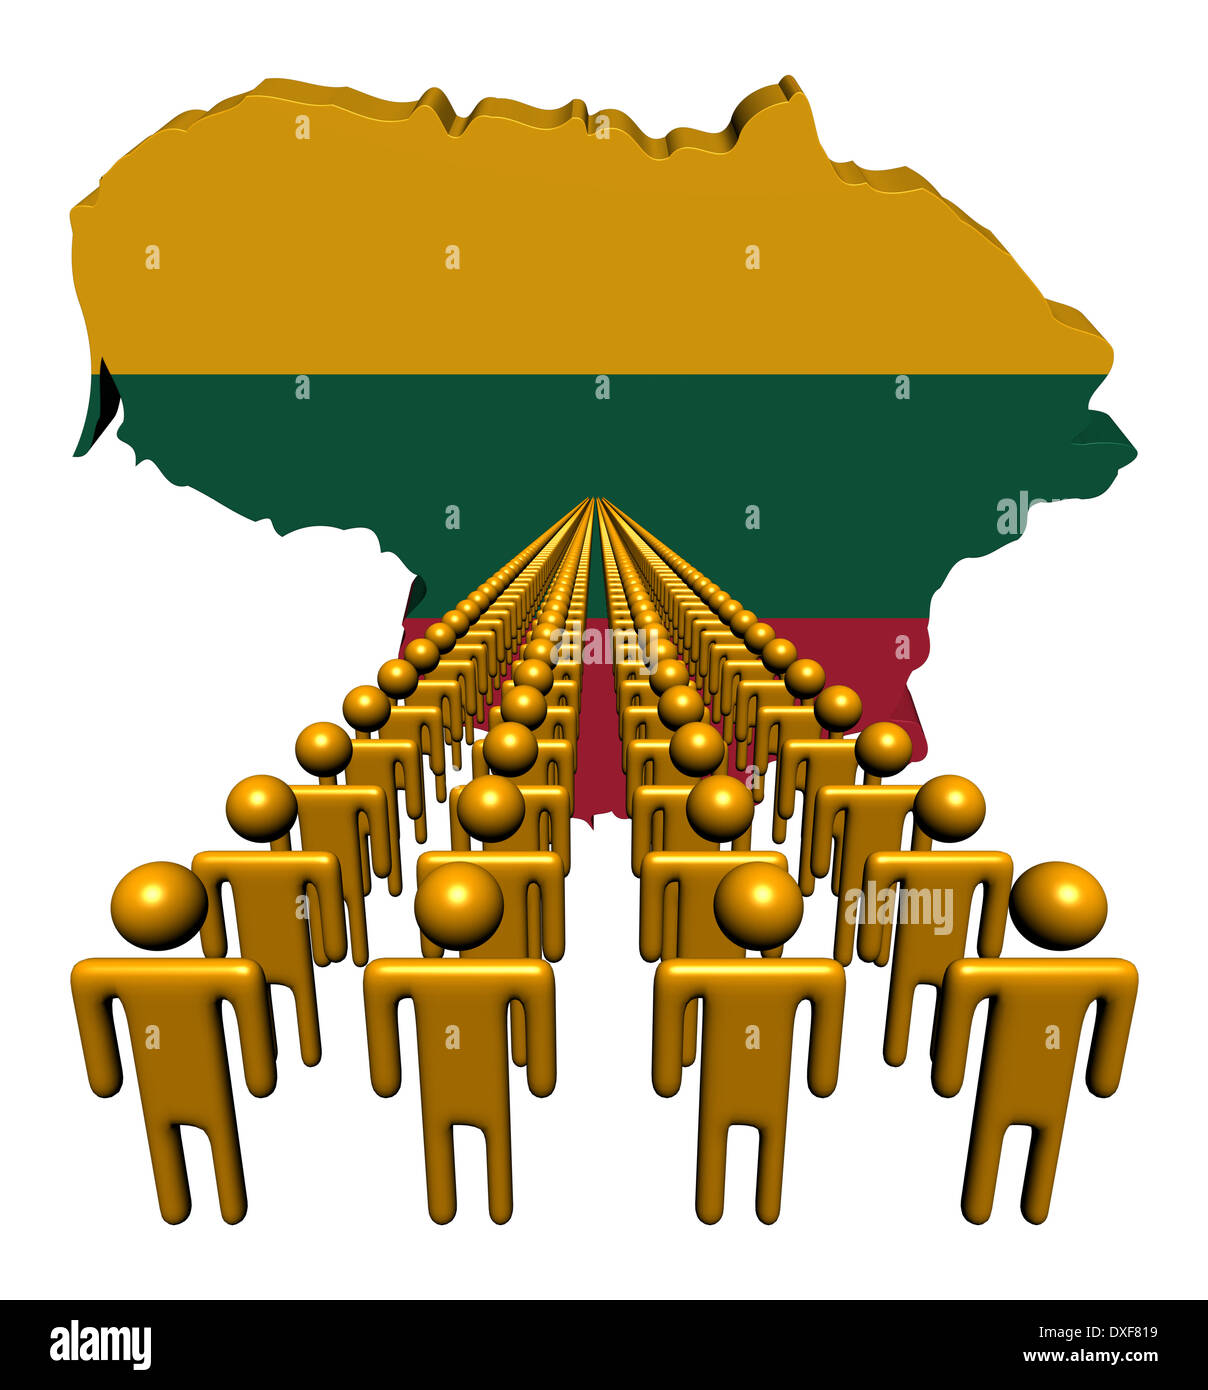 Lines of people with Lithuania map flag illustration Stock Photo